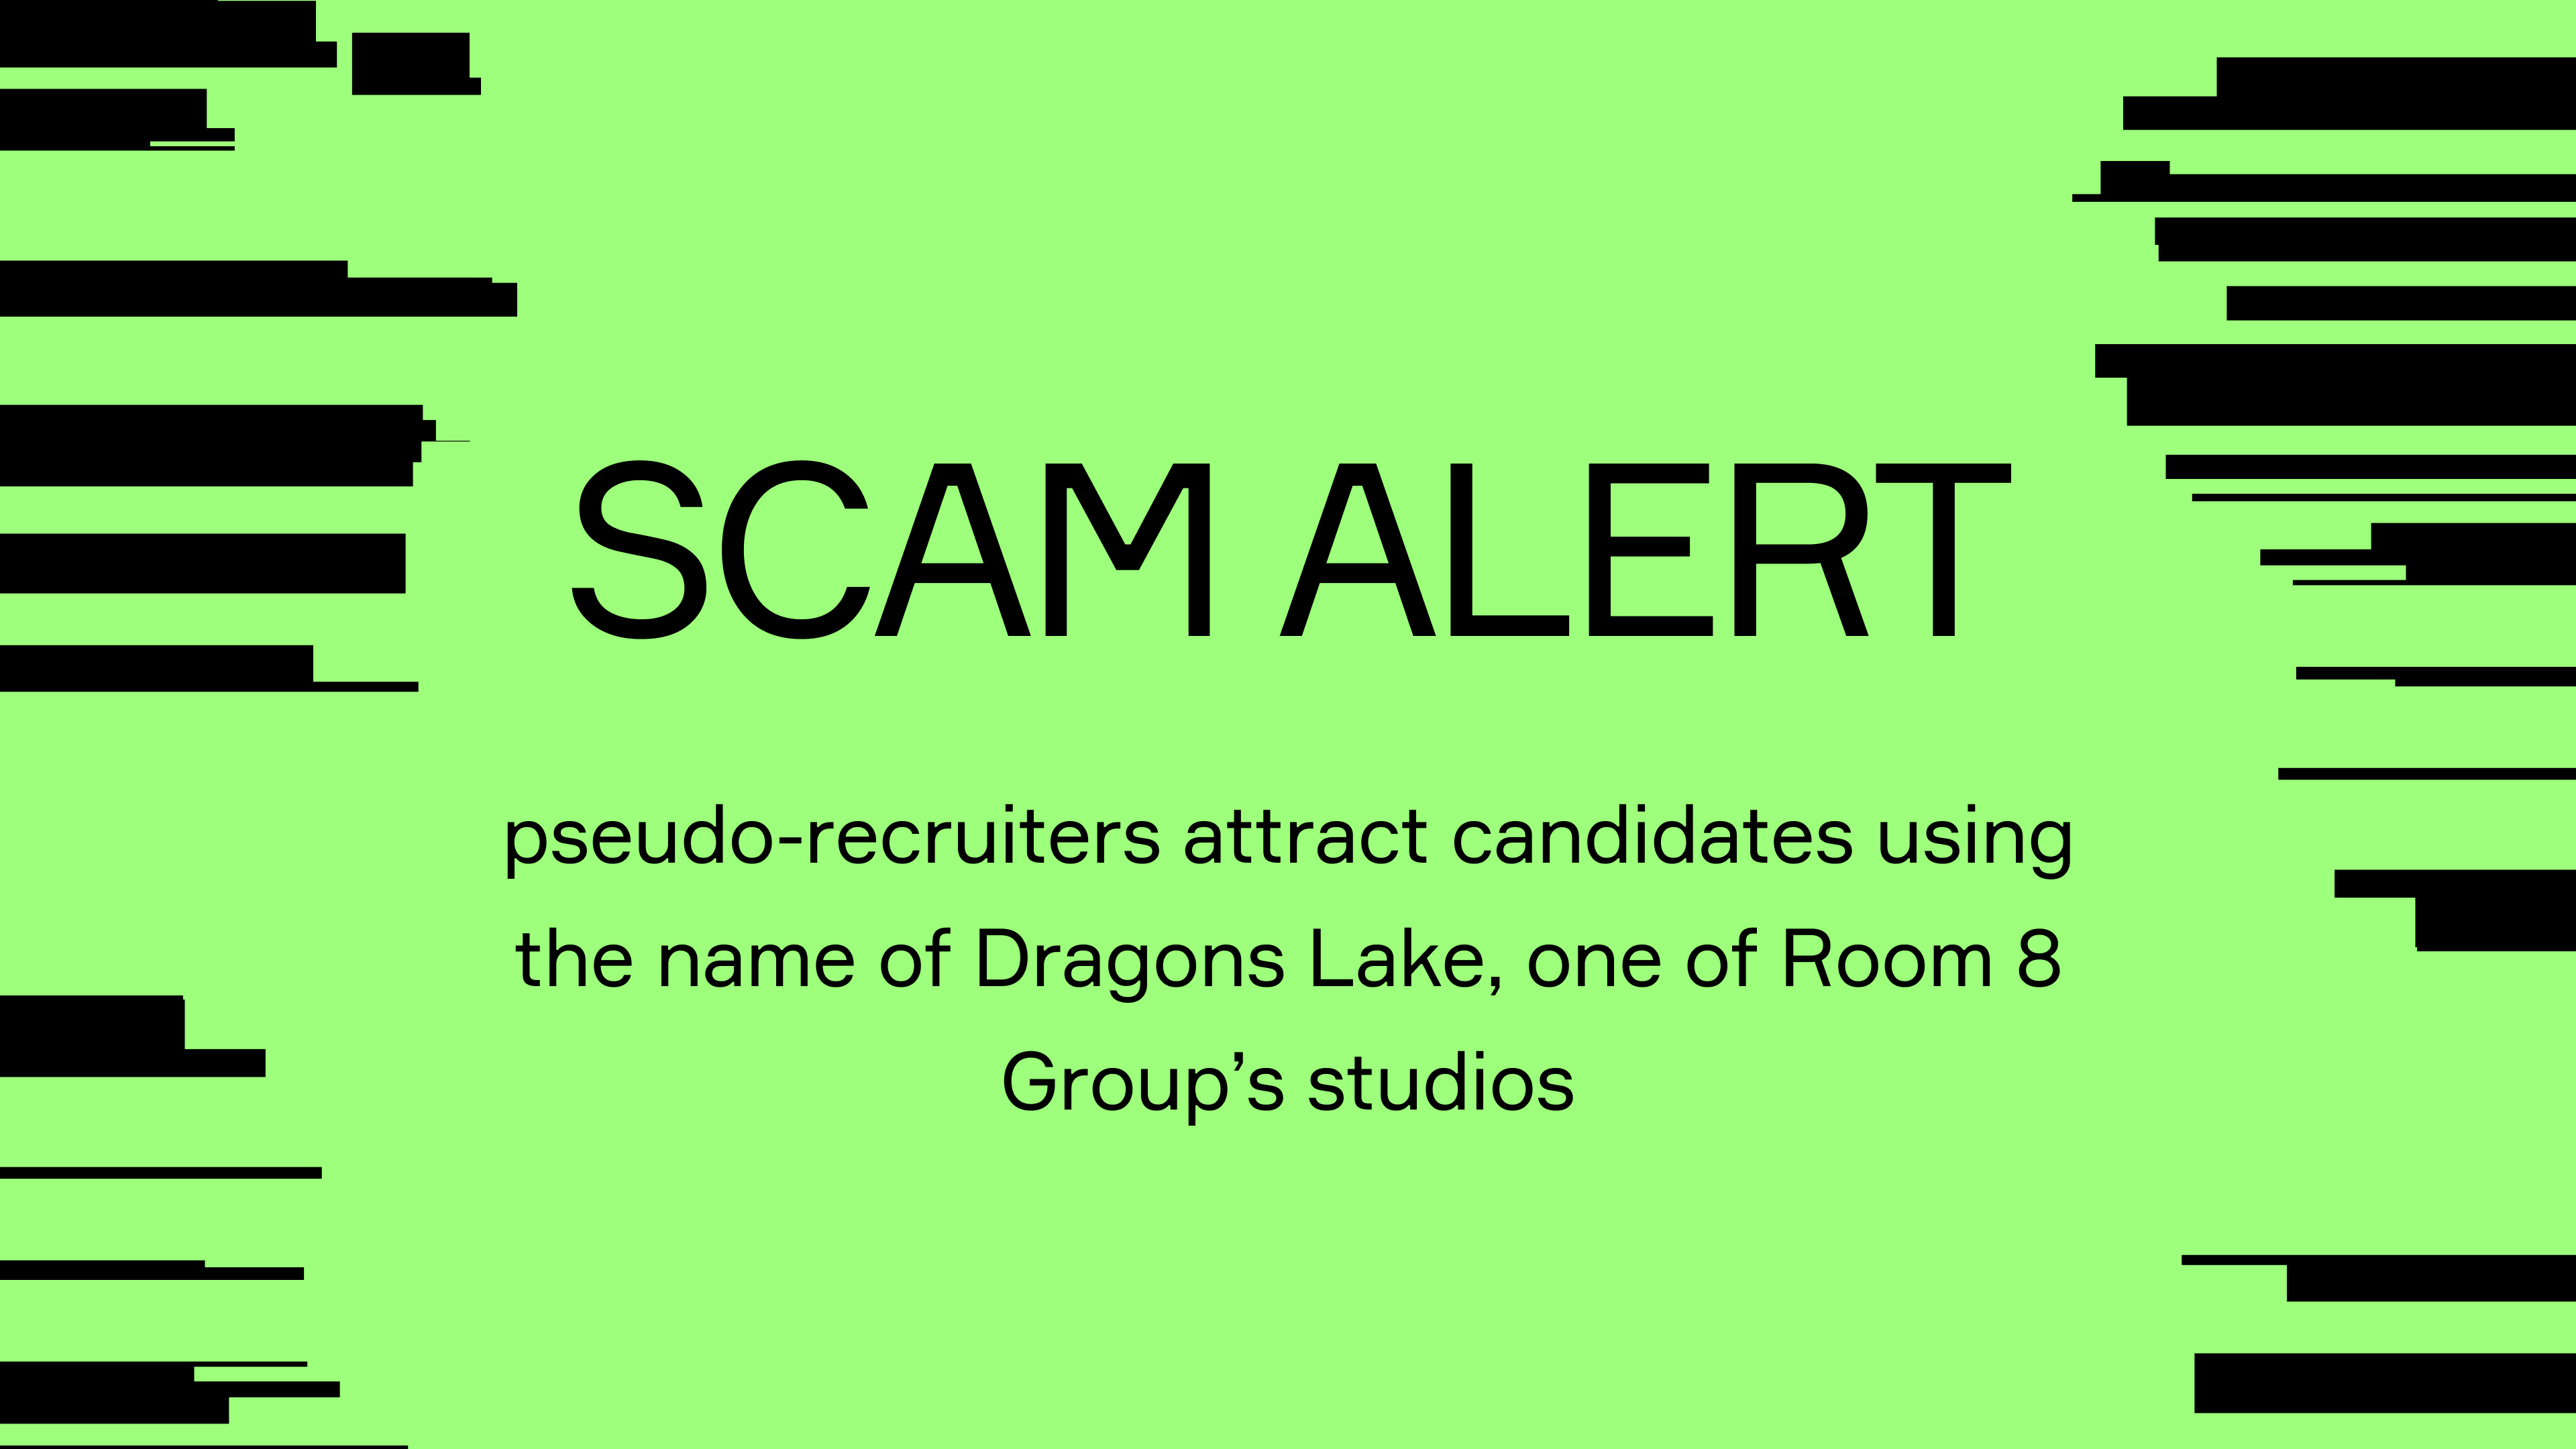 Scam alert — pseudo-recruiters attract candidates using the name of Dragons Lake, one of Room 8 Group’s studios